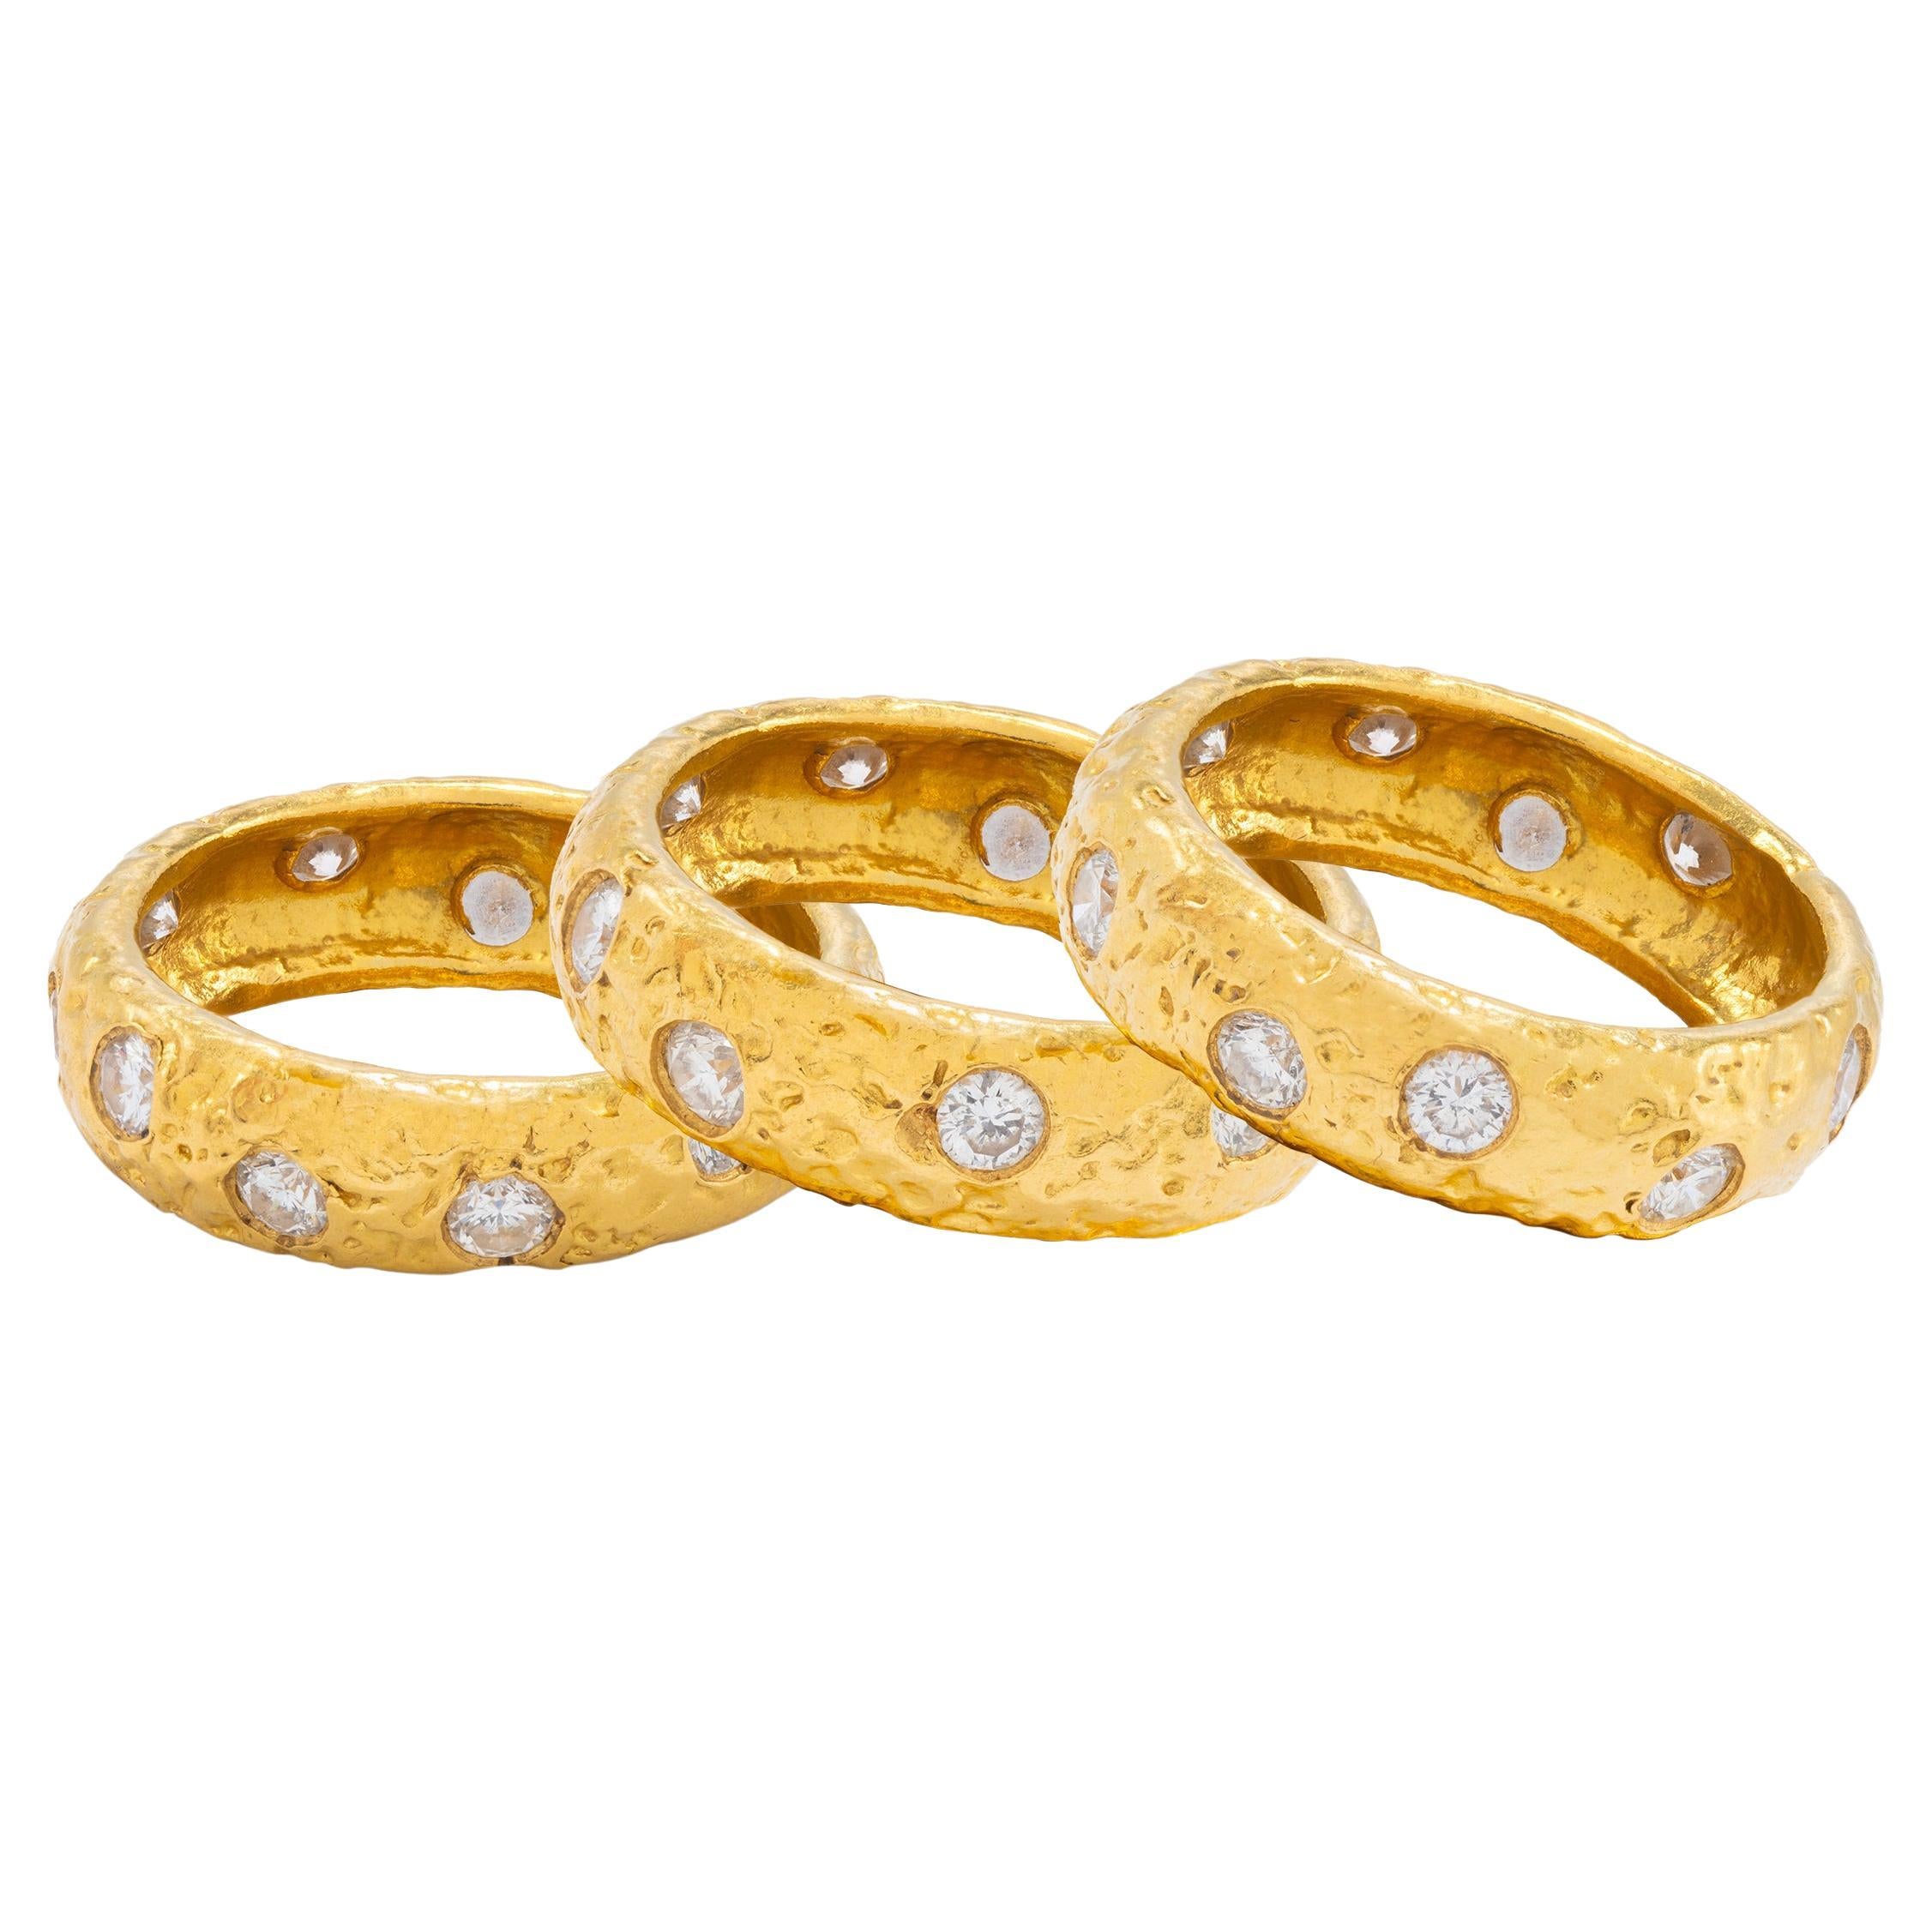 22k Gold Hammered Thick Stacking Rings with Diamonds, by Tagili For Sale